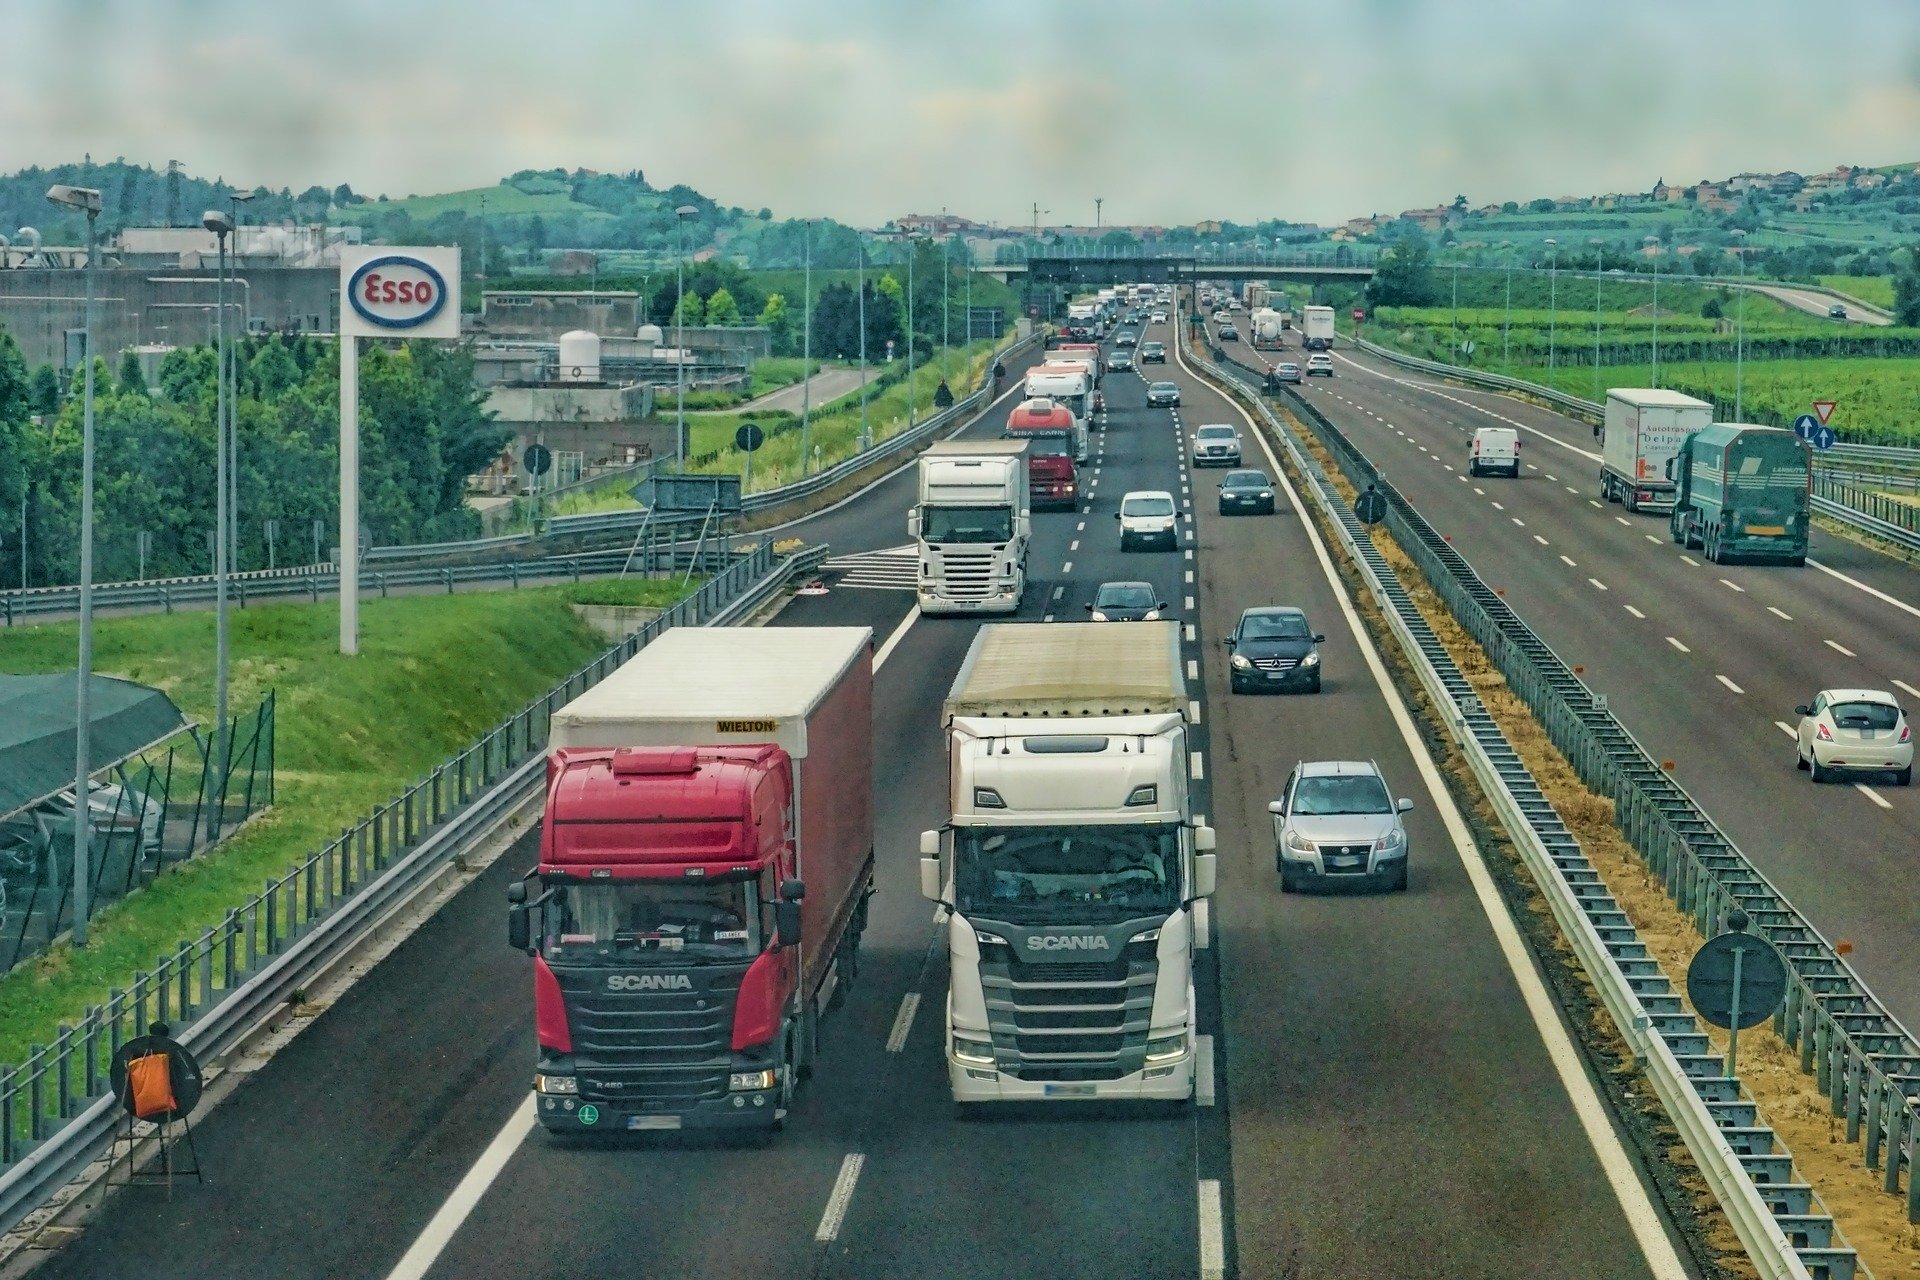 In Romania, the highways starting from the capital will be expanded to three lanes